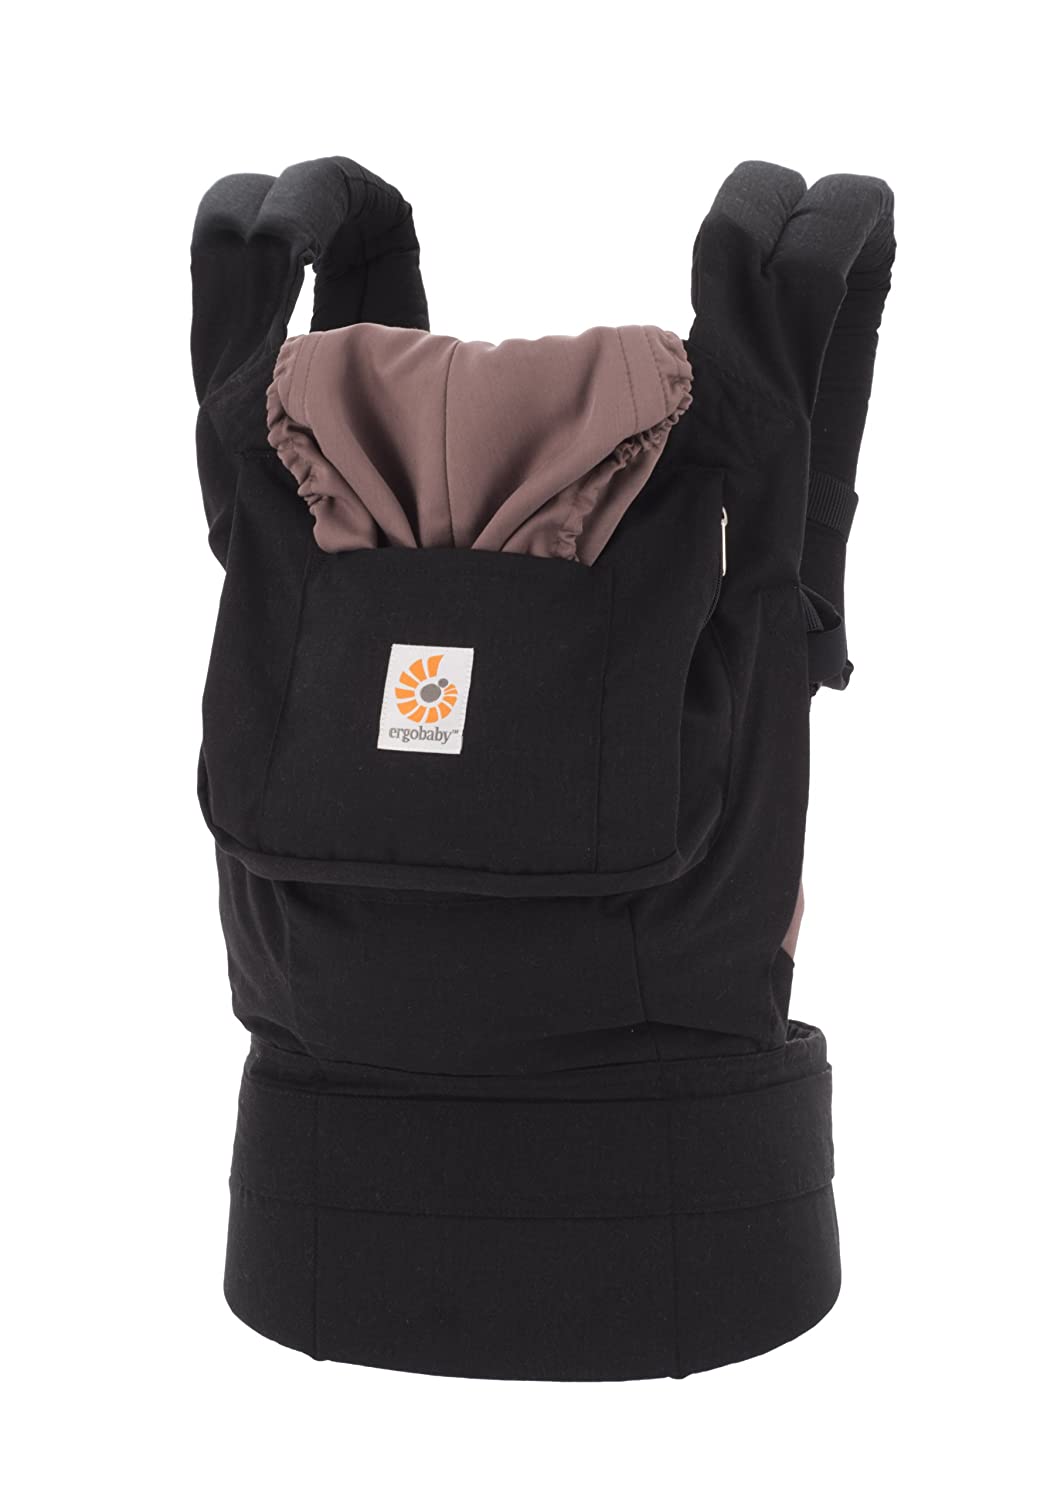 Ergobaby Original Earth Collection Baby Carrier Black